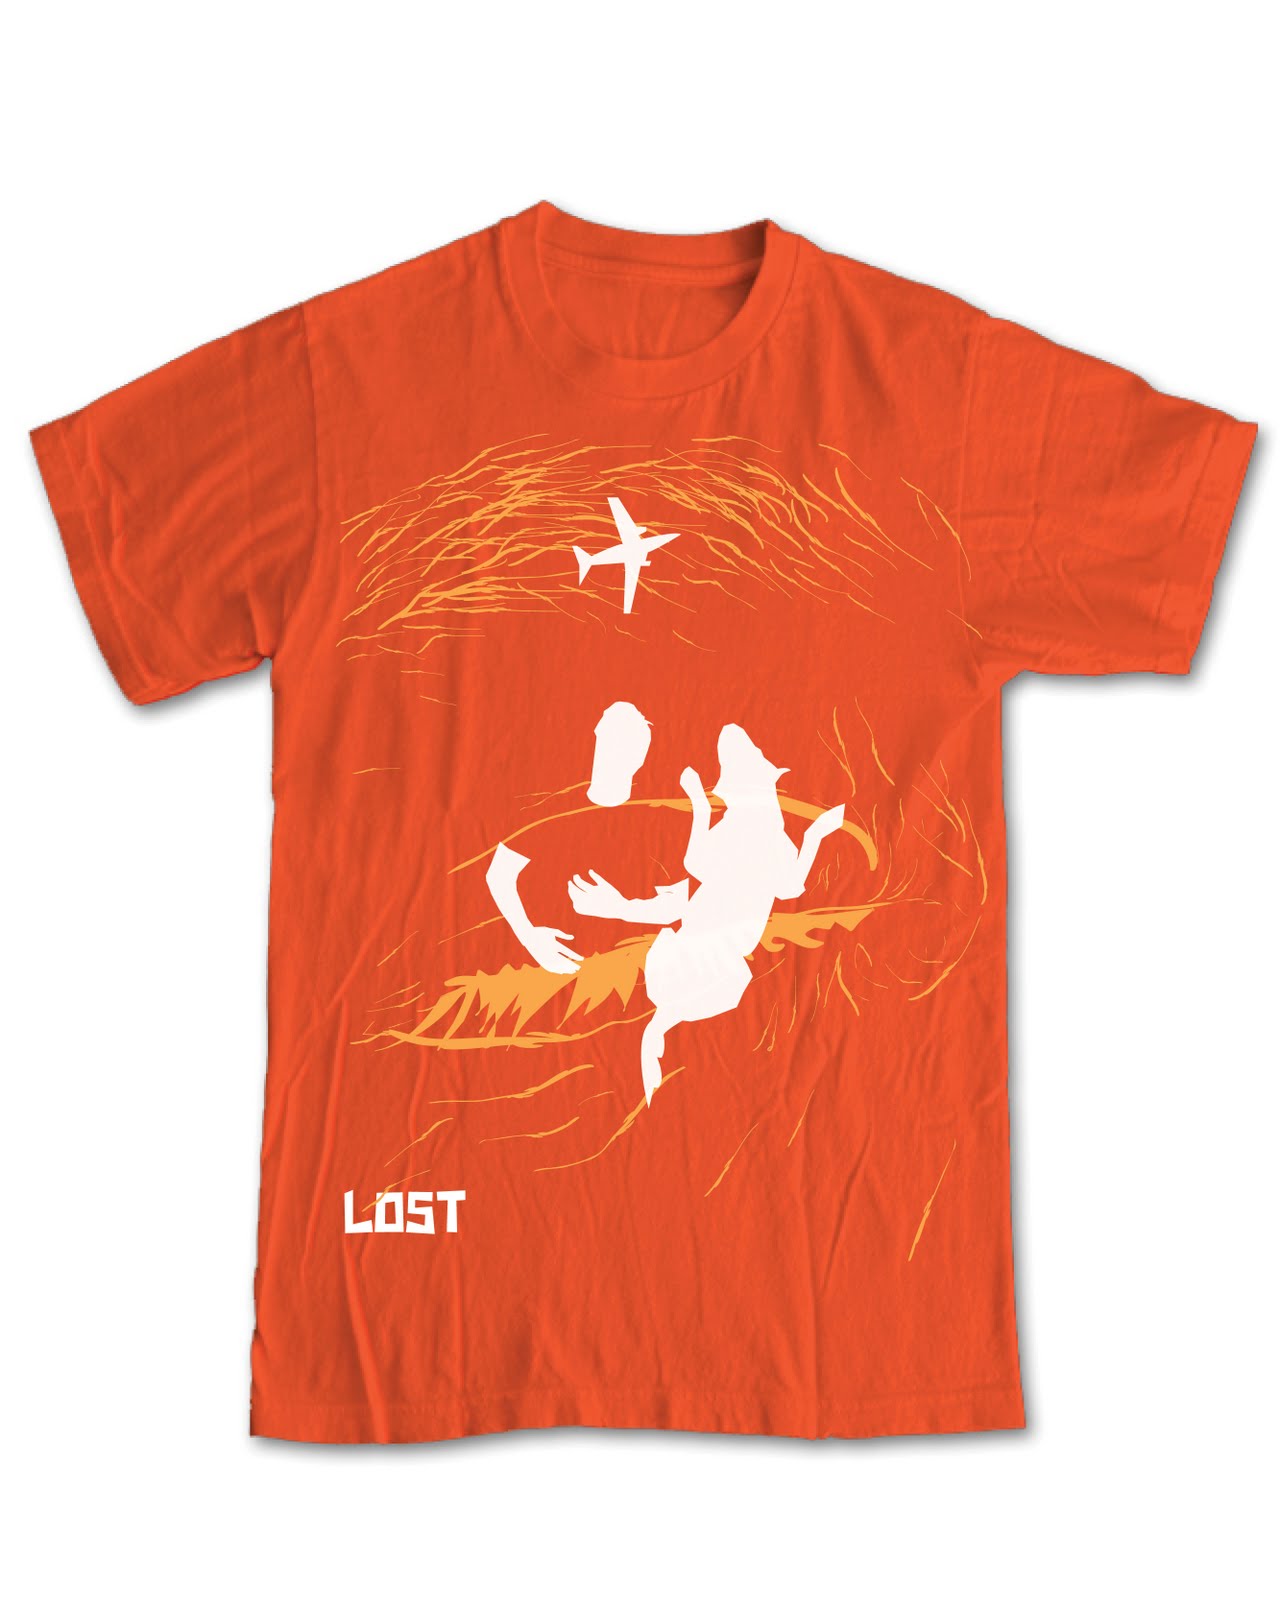 LOST THE END T SHIRT